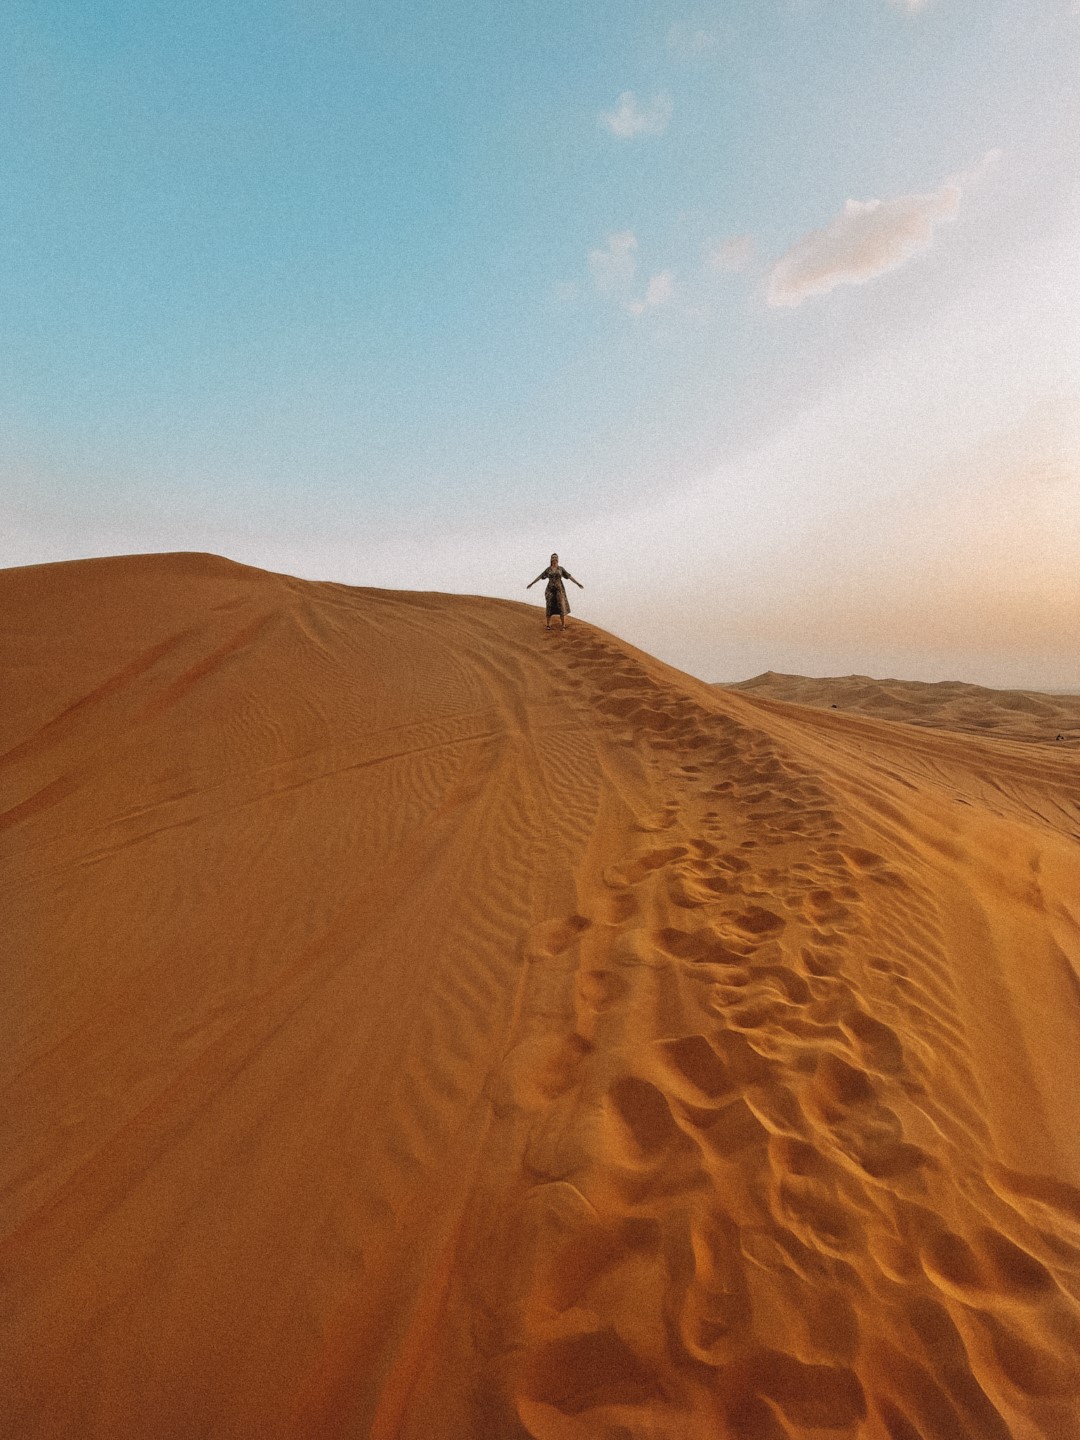 Image of a woman on a dune in the desert in Dubai, inserted in a post about the best Dubai desert safari to book.